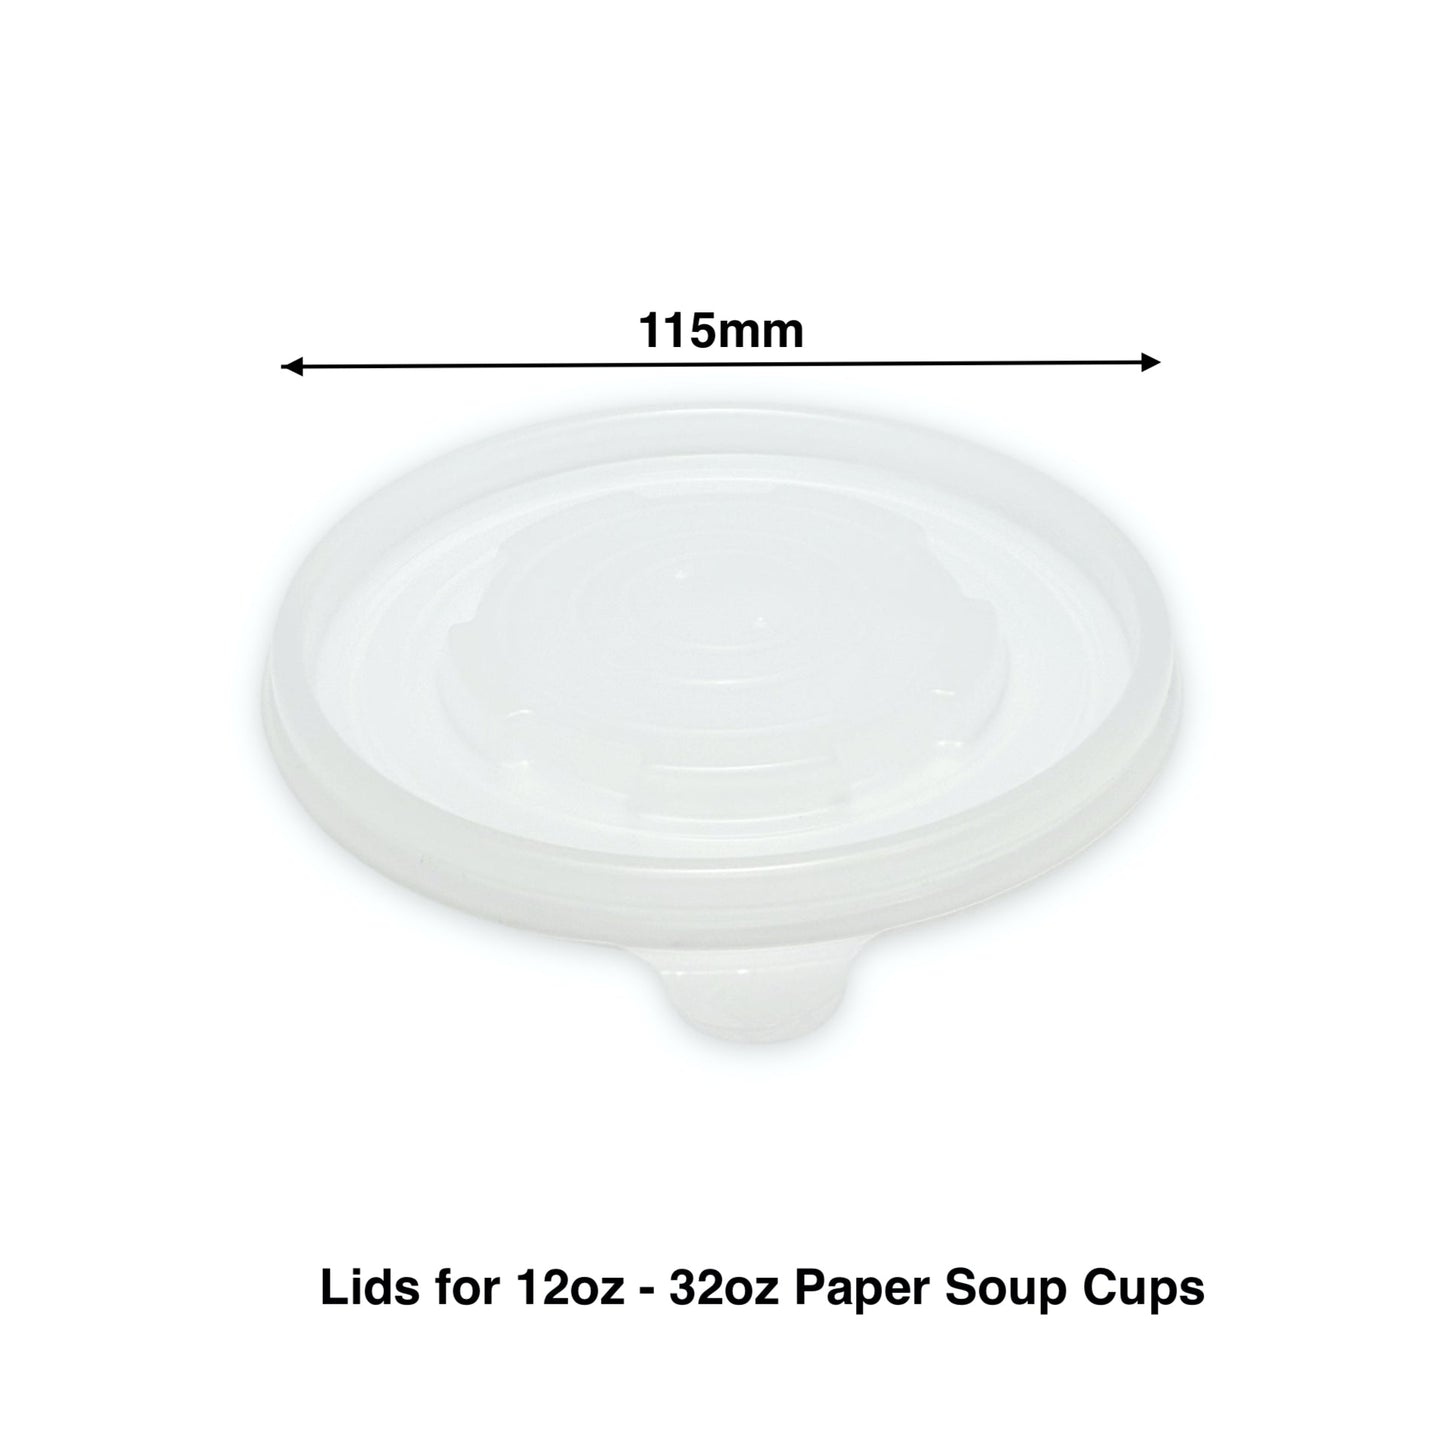 KIS-SL115G | 115mm PP Lid for 12oz-32oz Paper Soup Container; From $0.047/pc